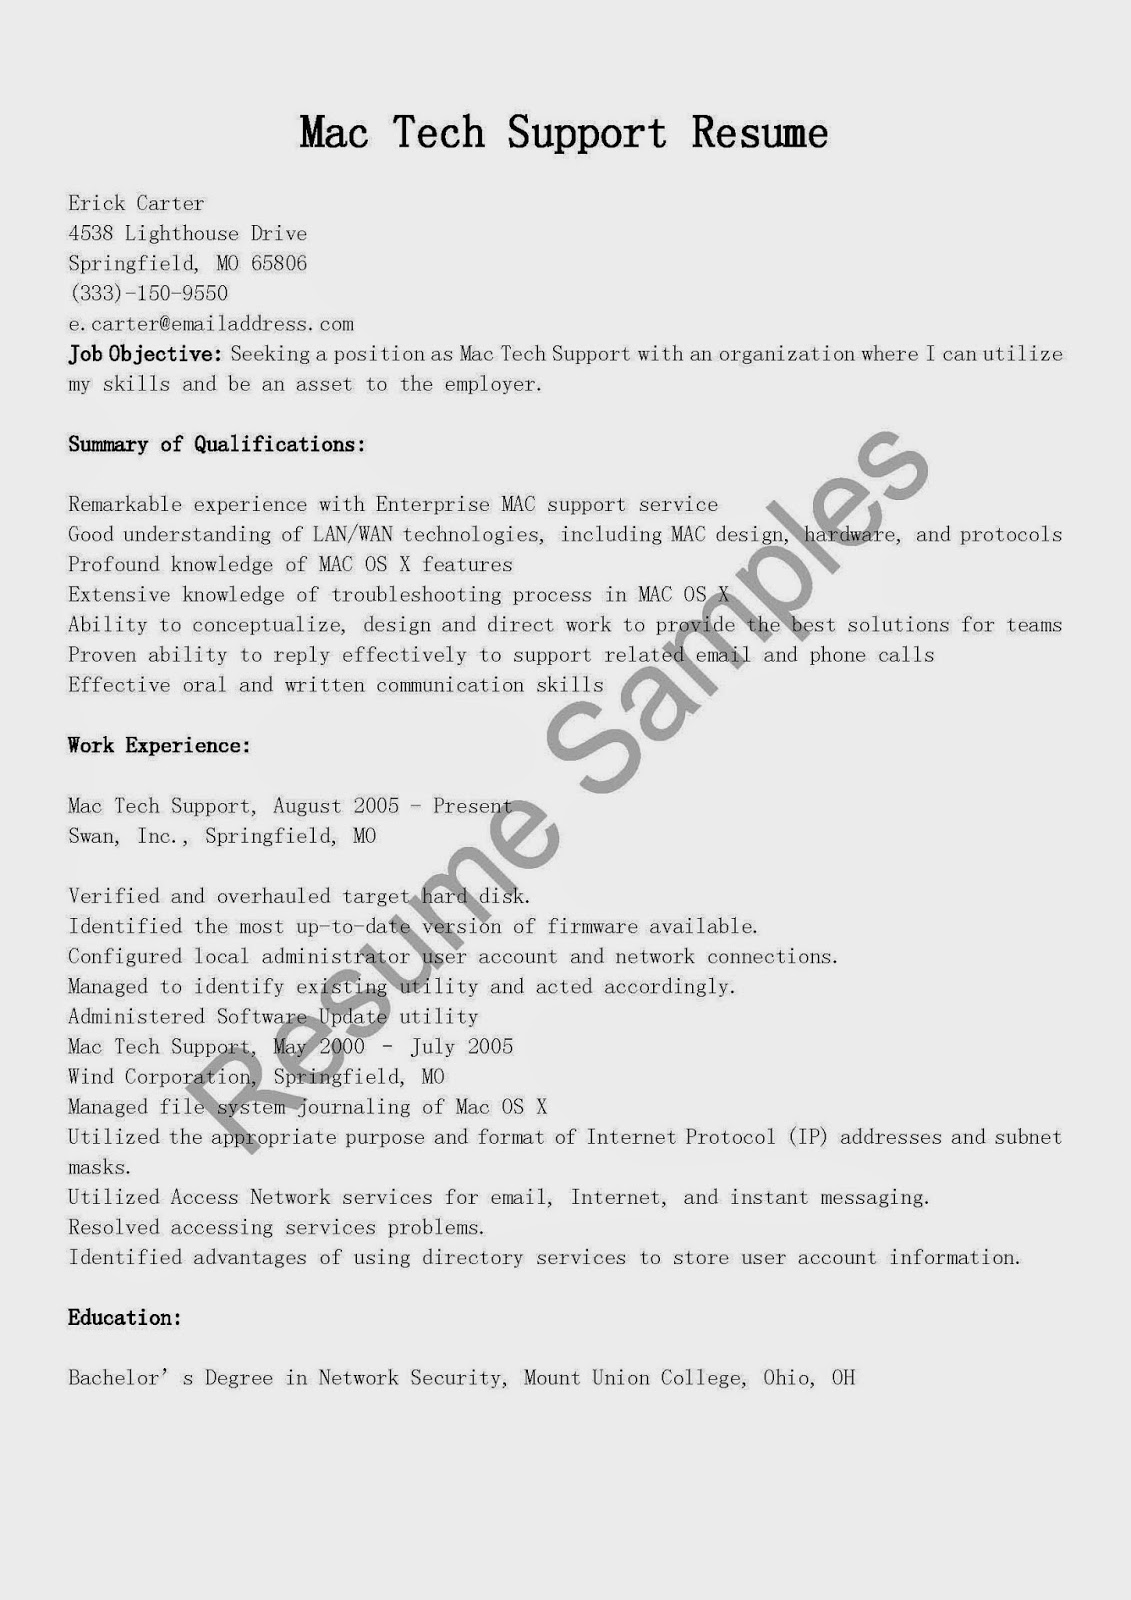 Oral and written skills resume